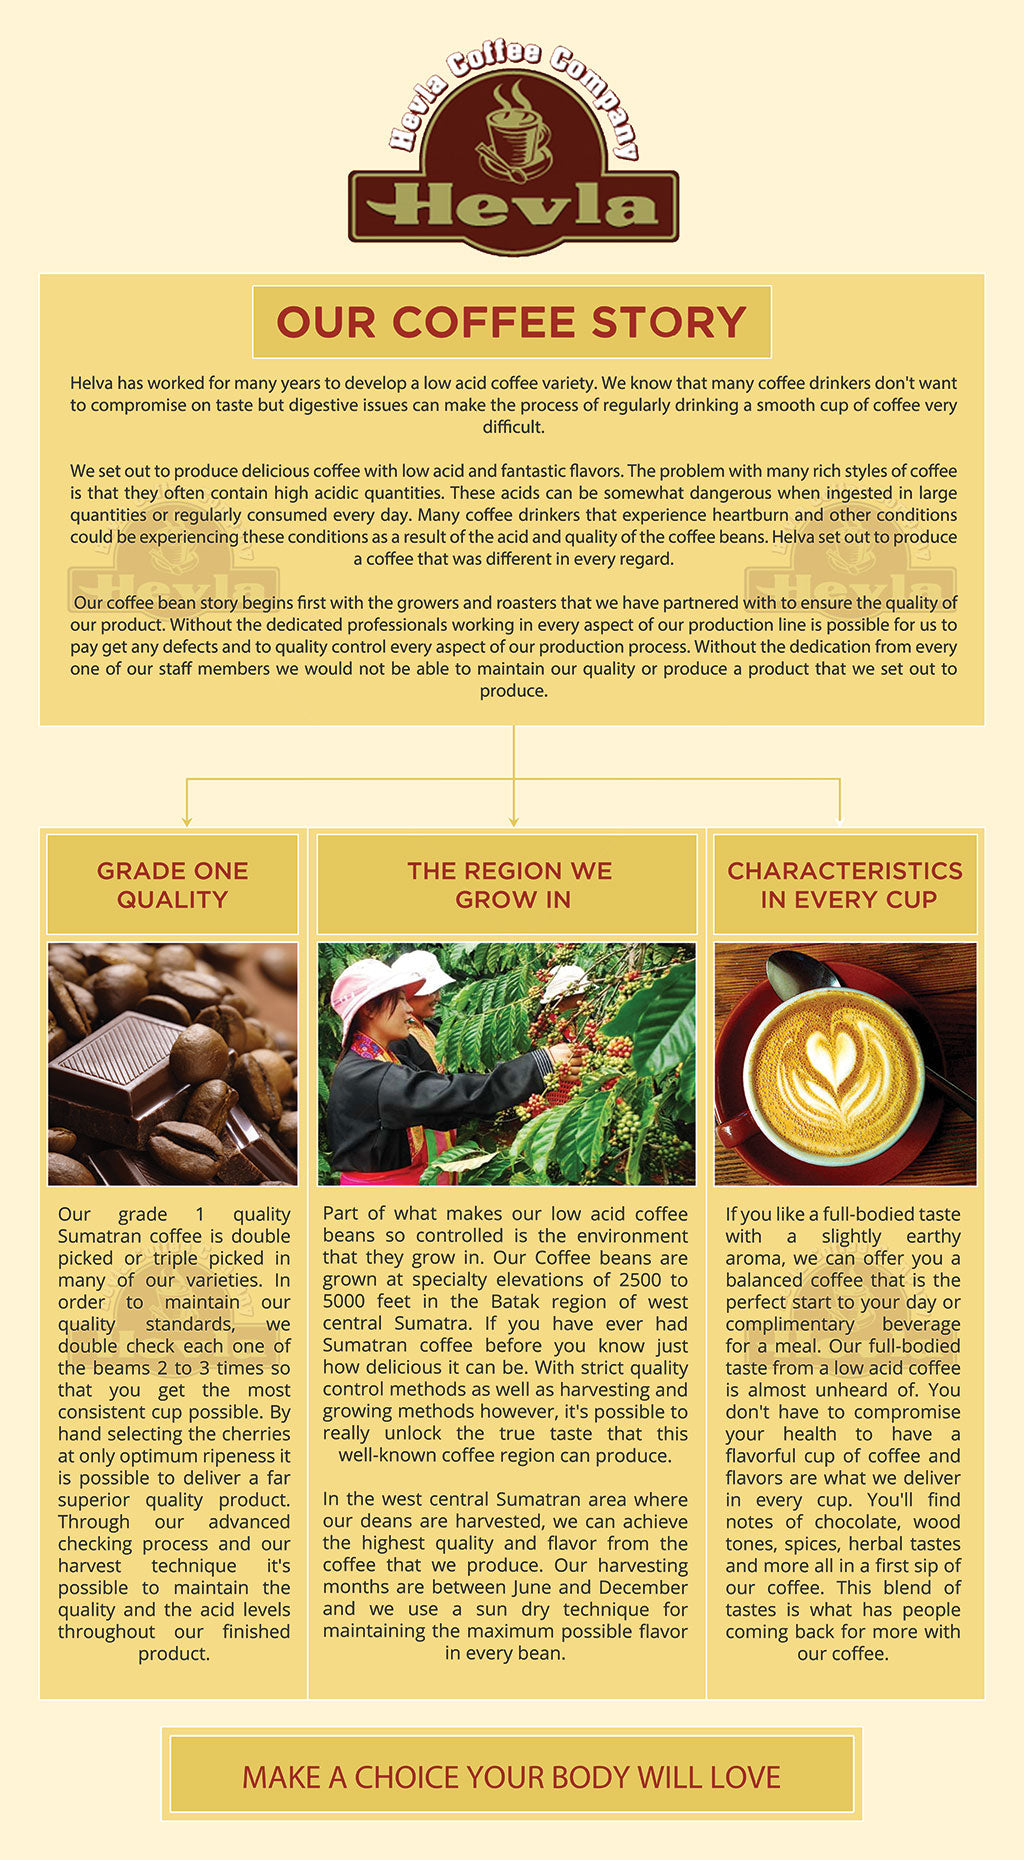 Our Coffee Story